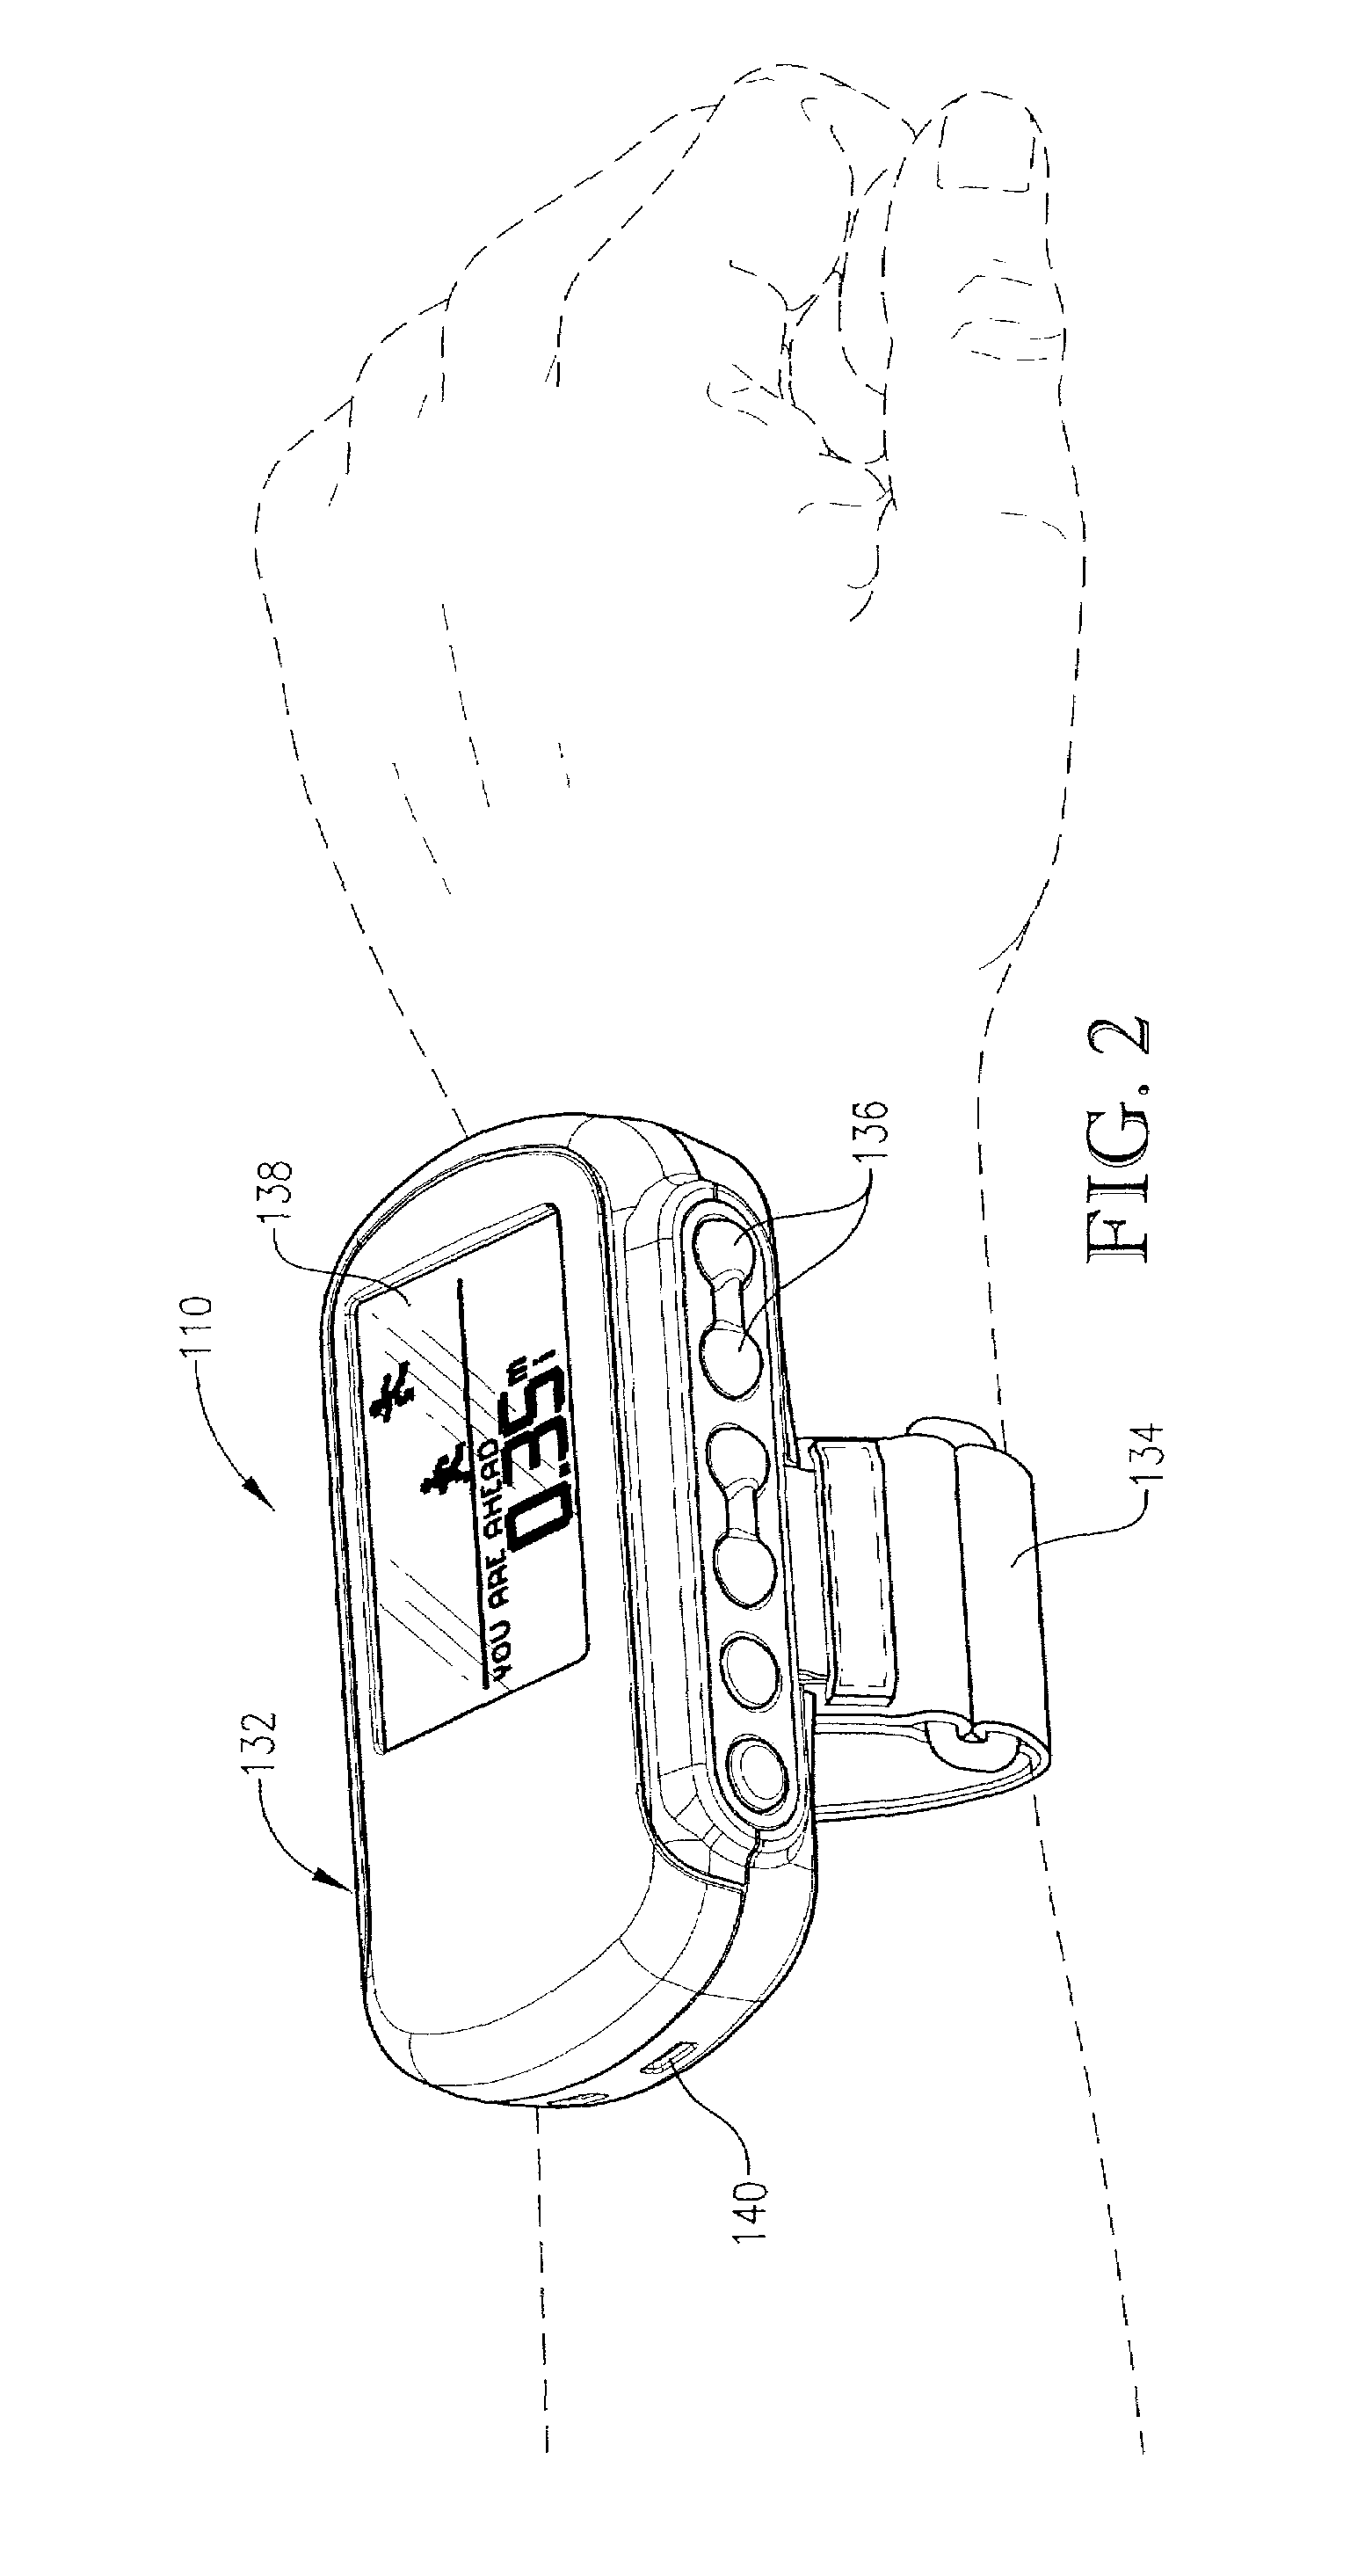 Electronic exercise monitor and method using a location determining component and a pedometer